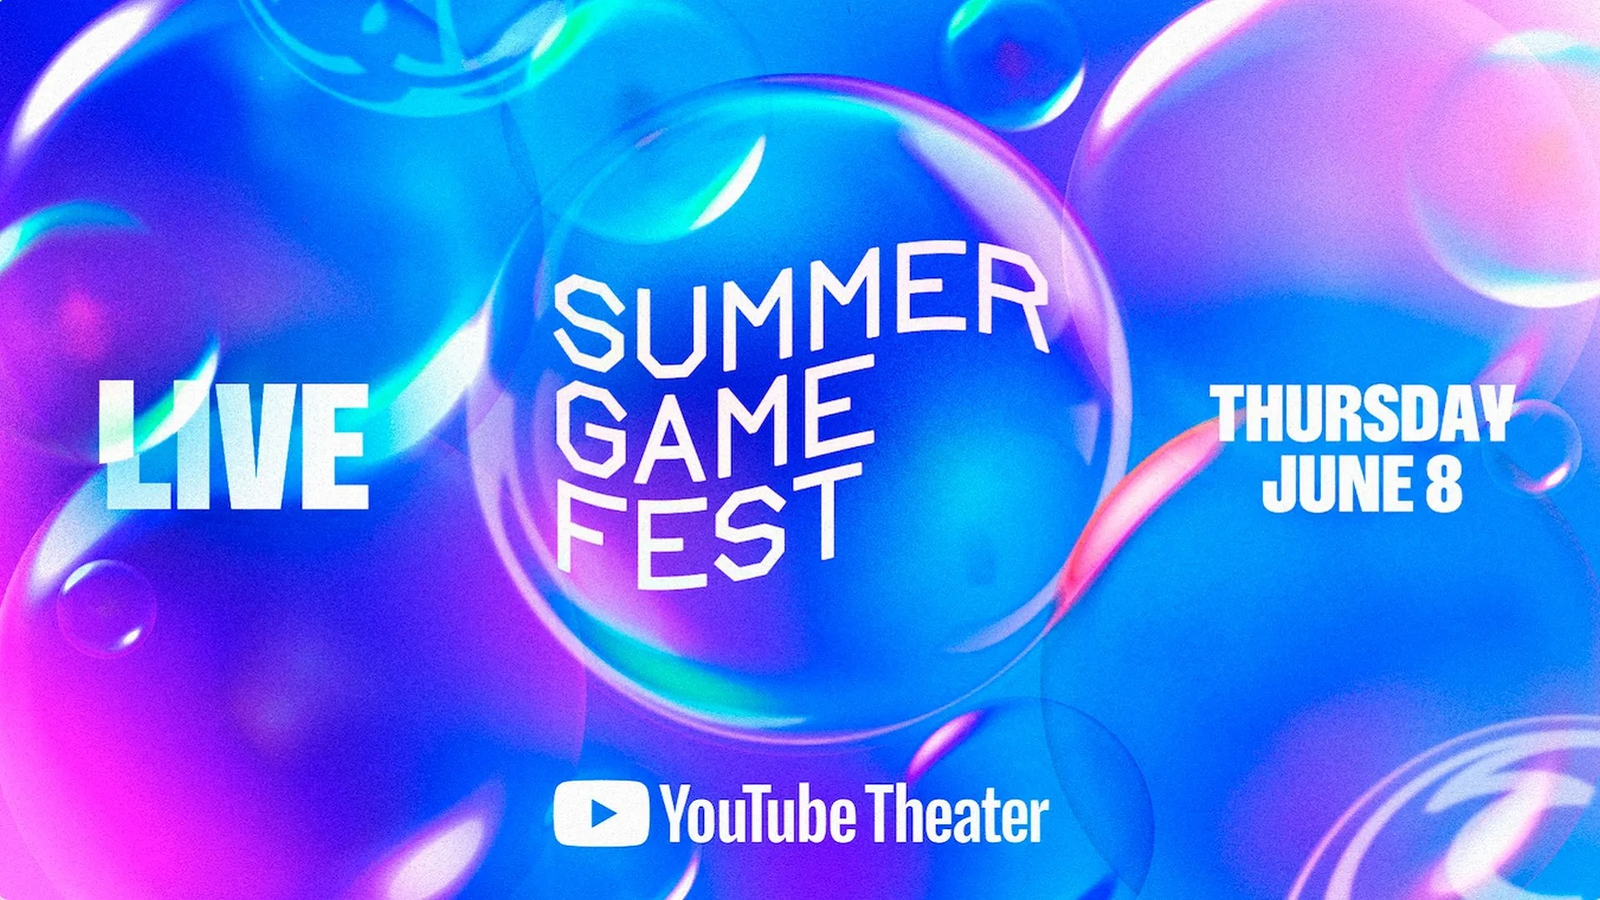 Throne and Liberty Will be Showcased on June 8 During Summer Game Fest